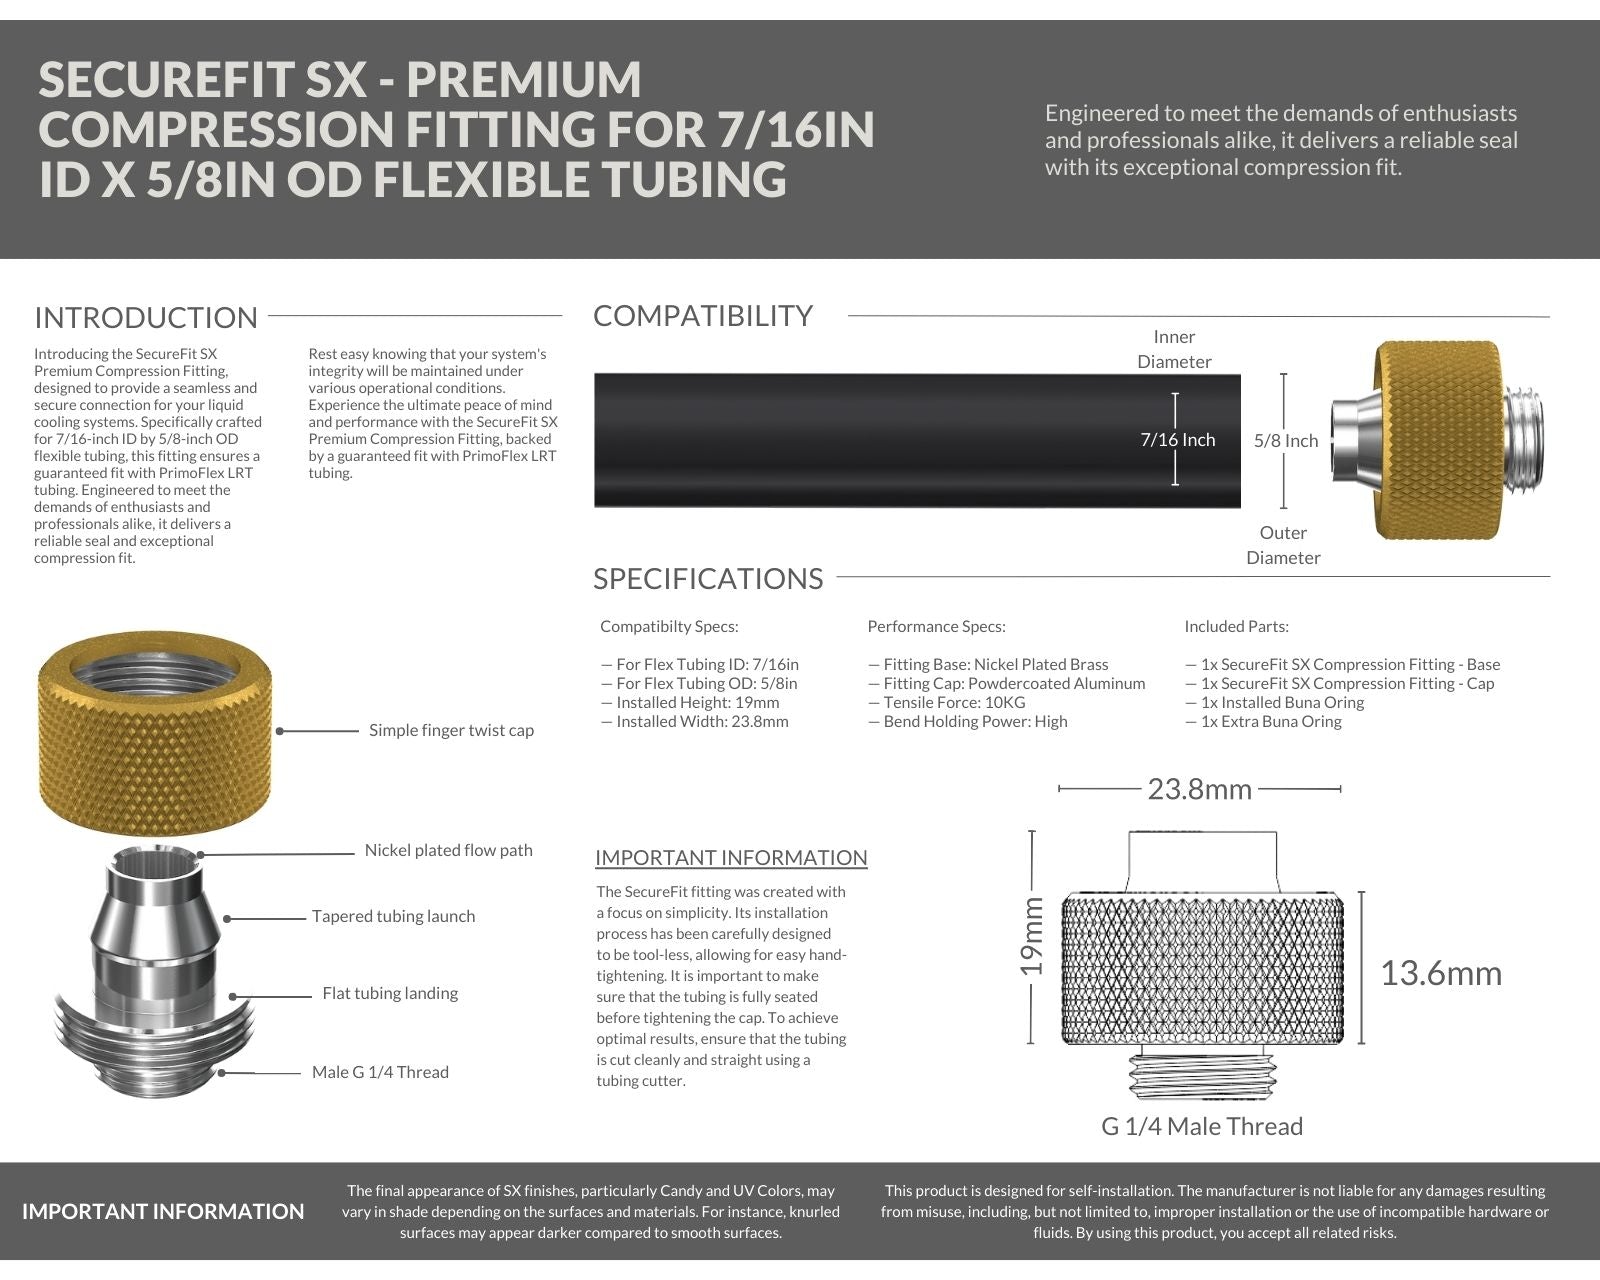 PrimoChill SecureFit SX - Premium Compression Fitting For 7/16in ID x 5/8in OD Flexible Tubing (F-SFSX758) - Available in 20+ Colors, Custom Watercooling Loop Ready - Gold